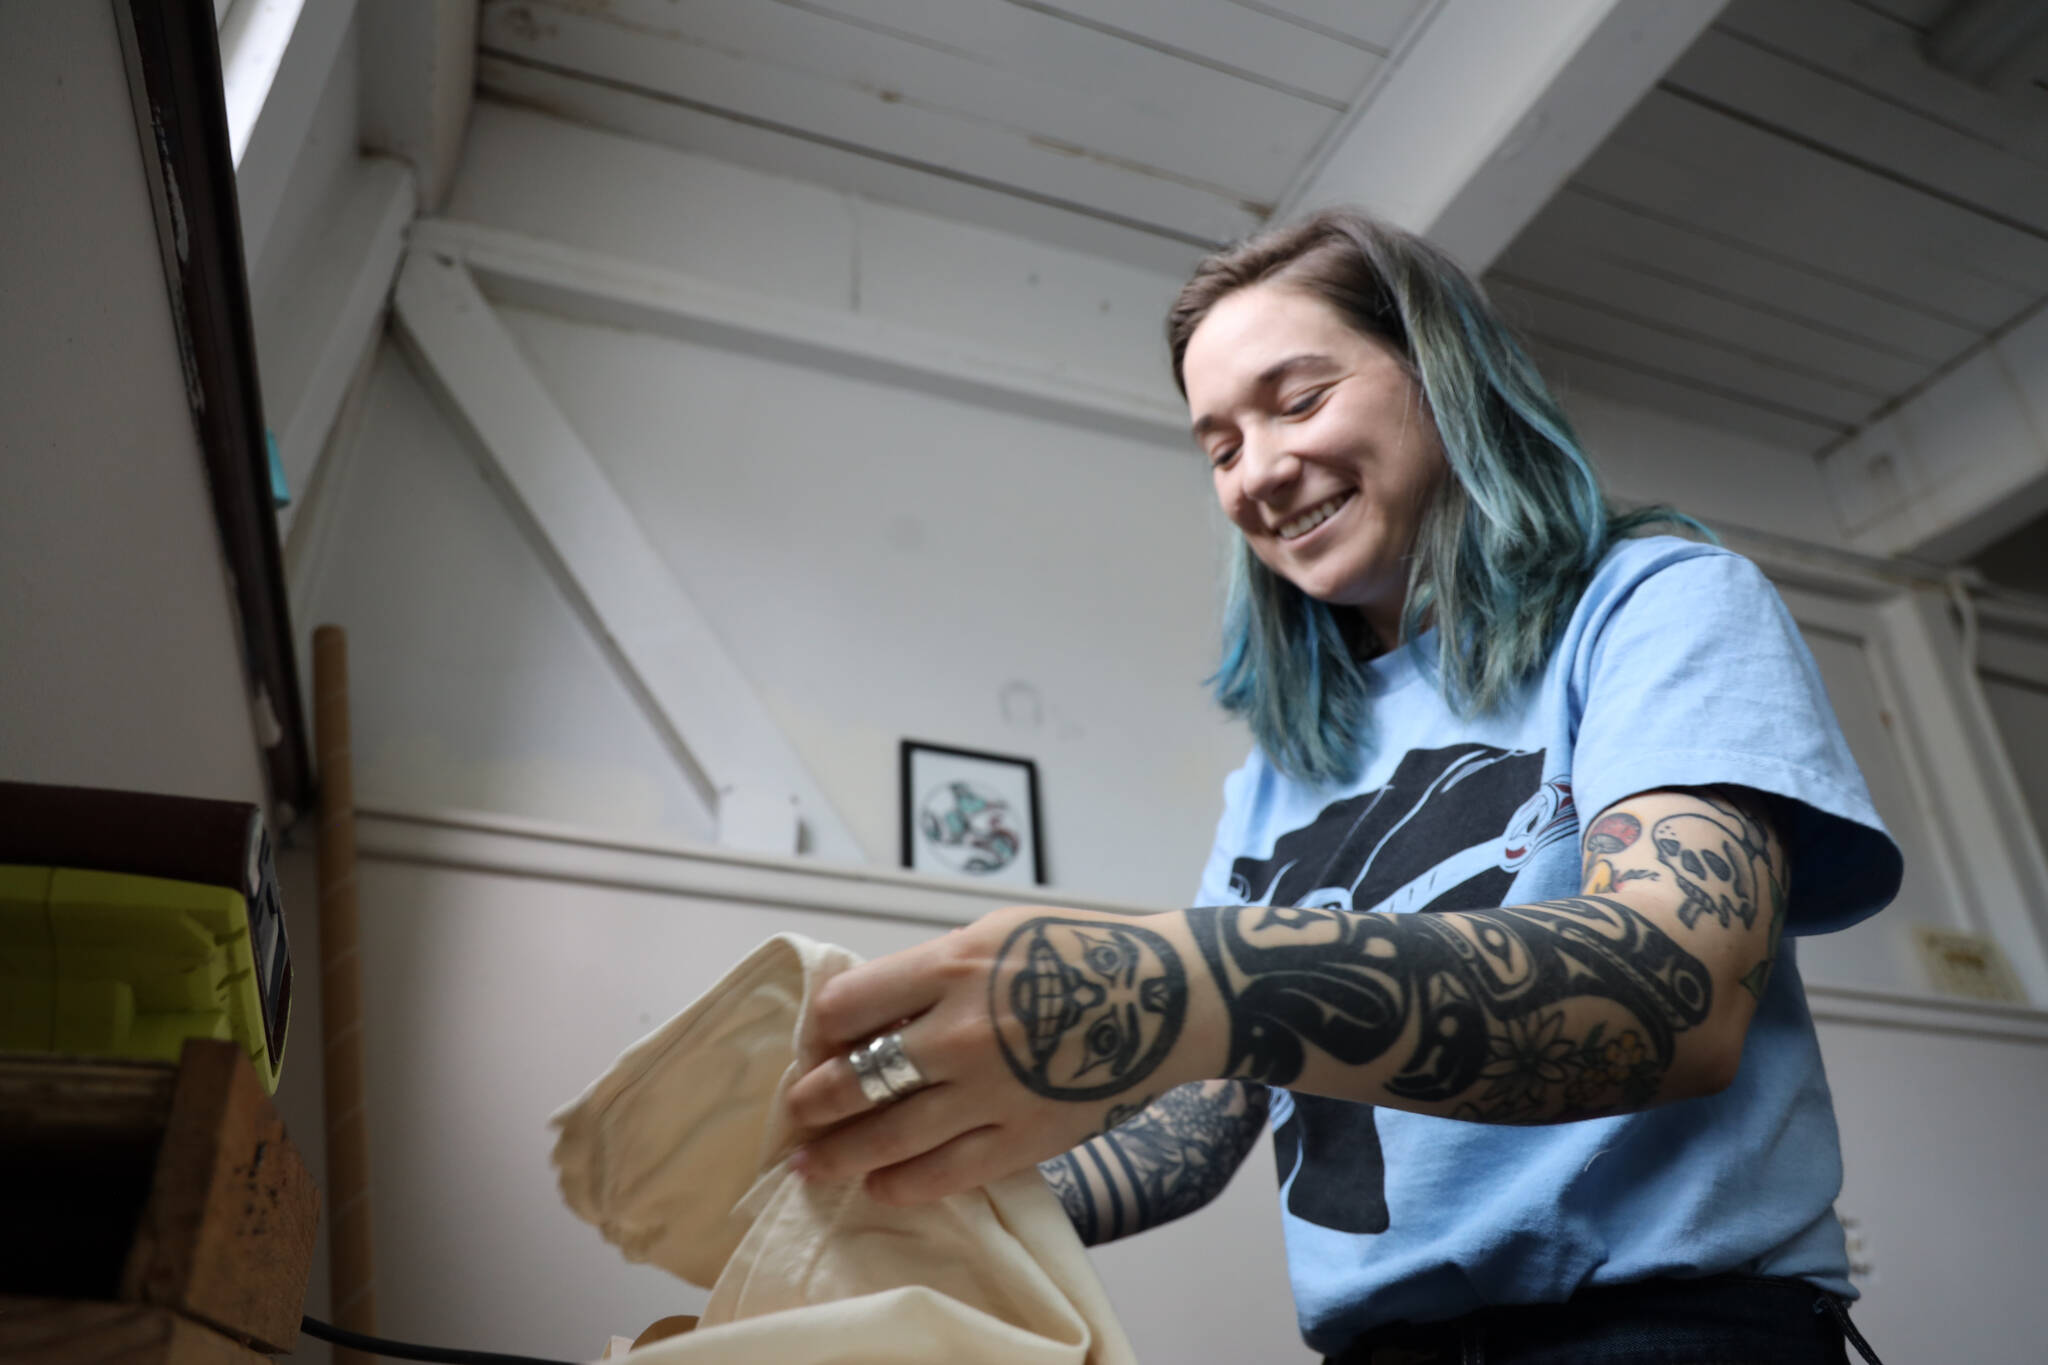 Chloey Cavanaugh, owner of Black and White Raven Co., folds a shirt at her downtown studio Monday morning. Cavanaugh’s company is an LGBTQ+ and Indigenous small business based in Juneau. (Clarise Larson / Juneau Empire)